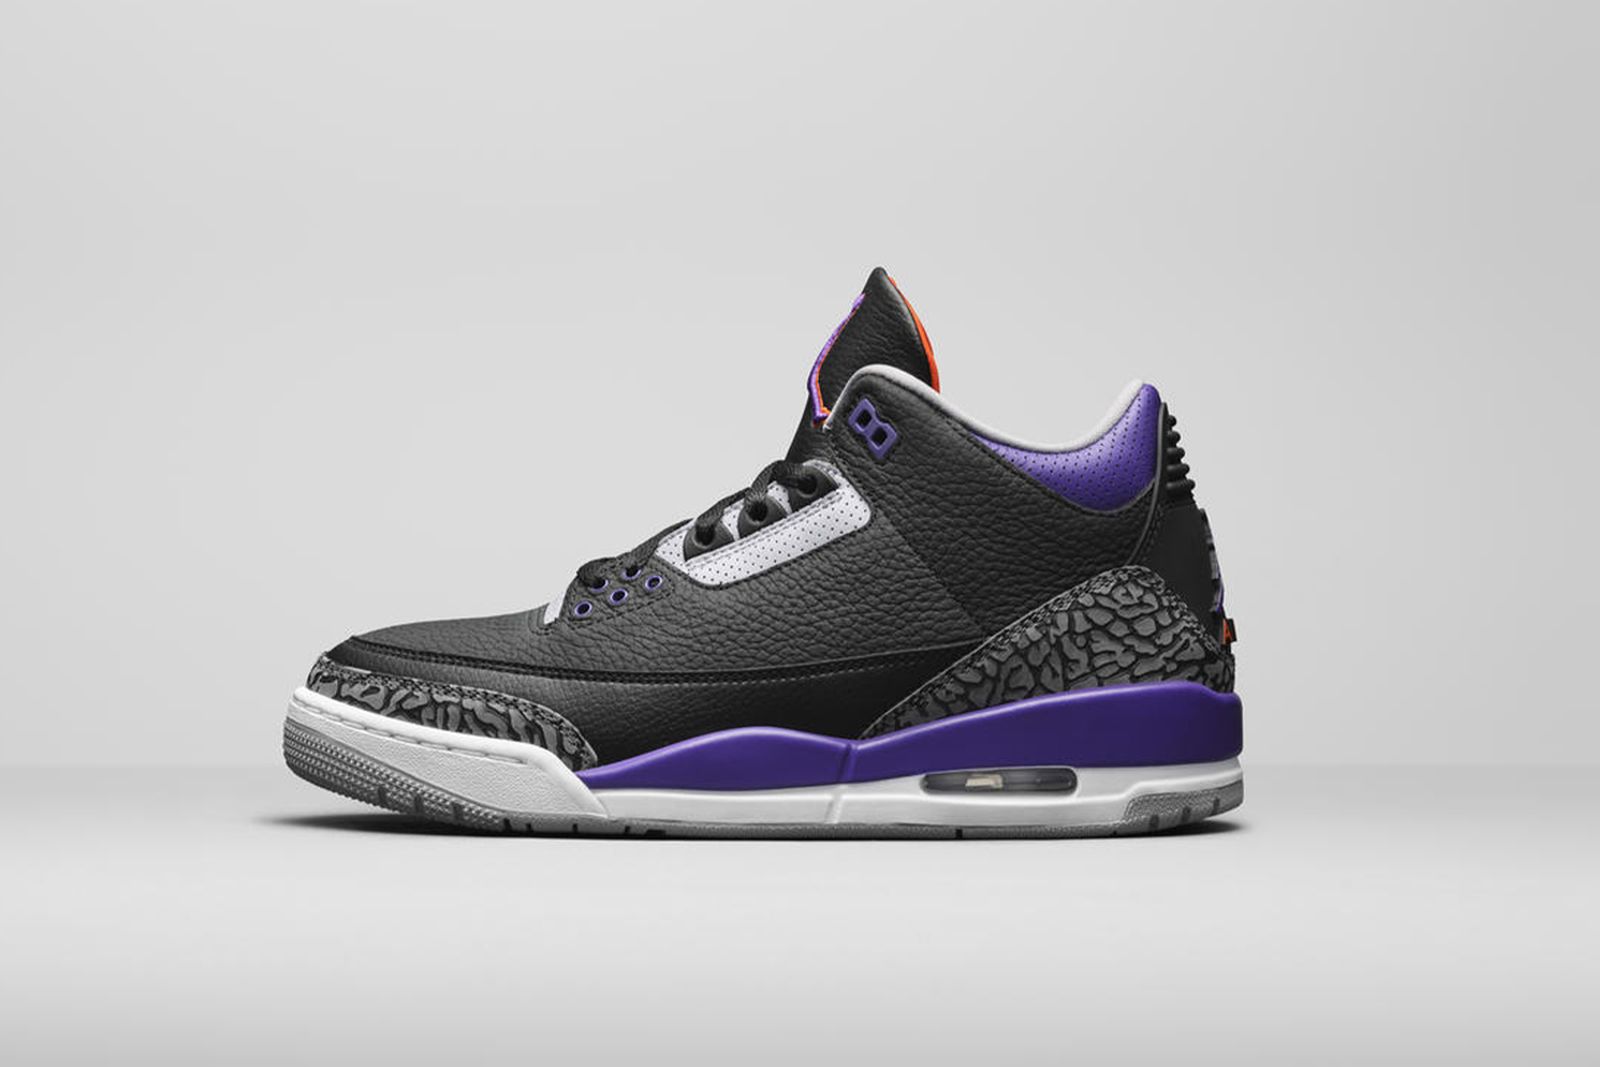 Jordan Brand Holiday Releases Ranked from to Best